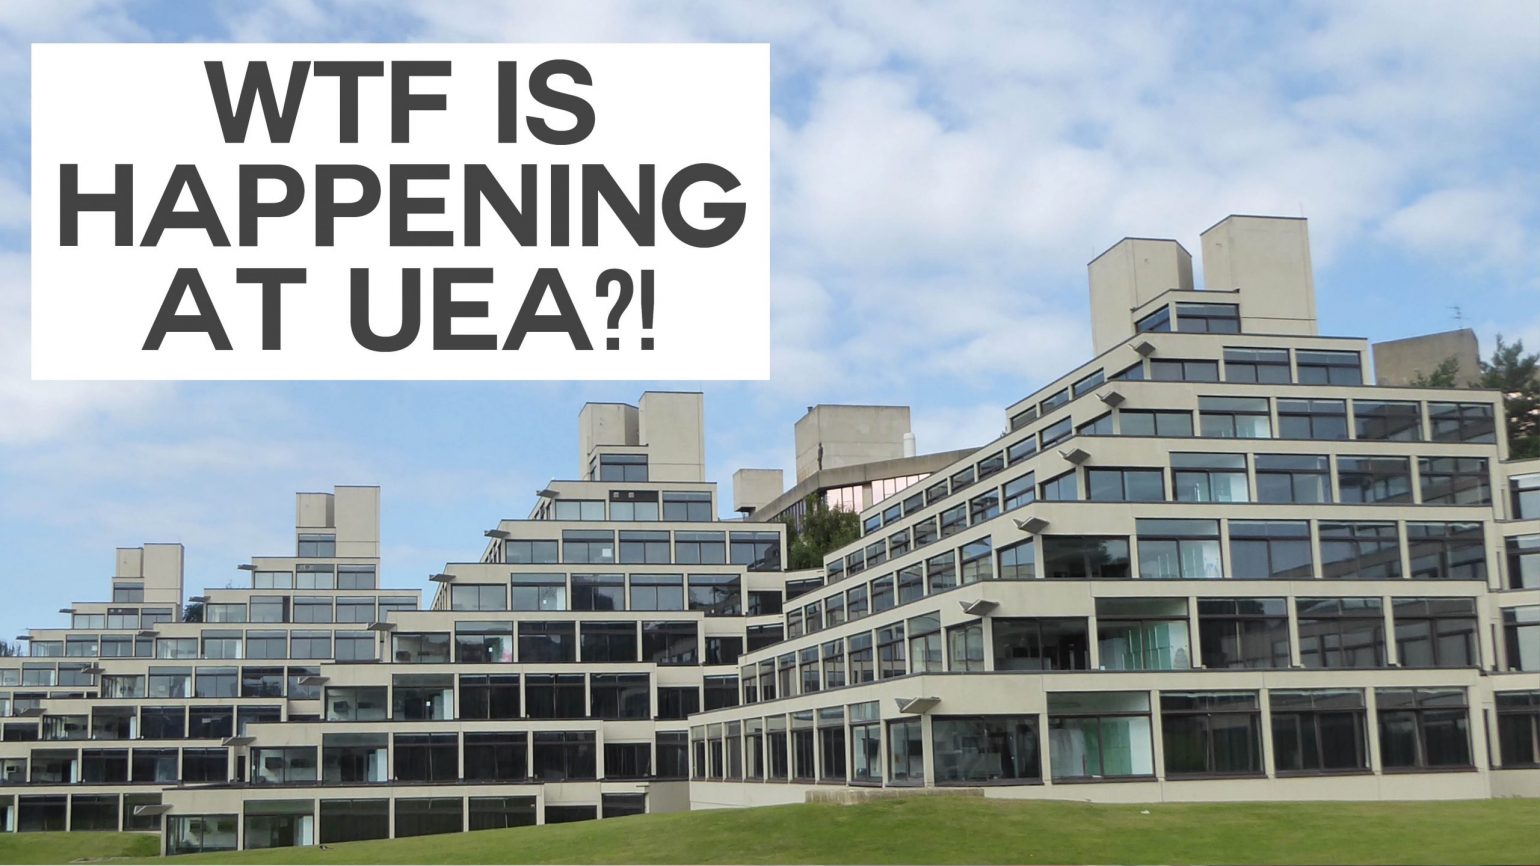 A photo of UEA's famous 'ziggurat' student accommodation with text overlaid reading "WTF is happening at UEA?"